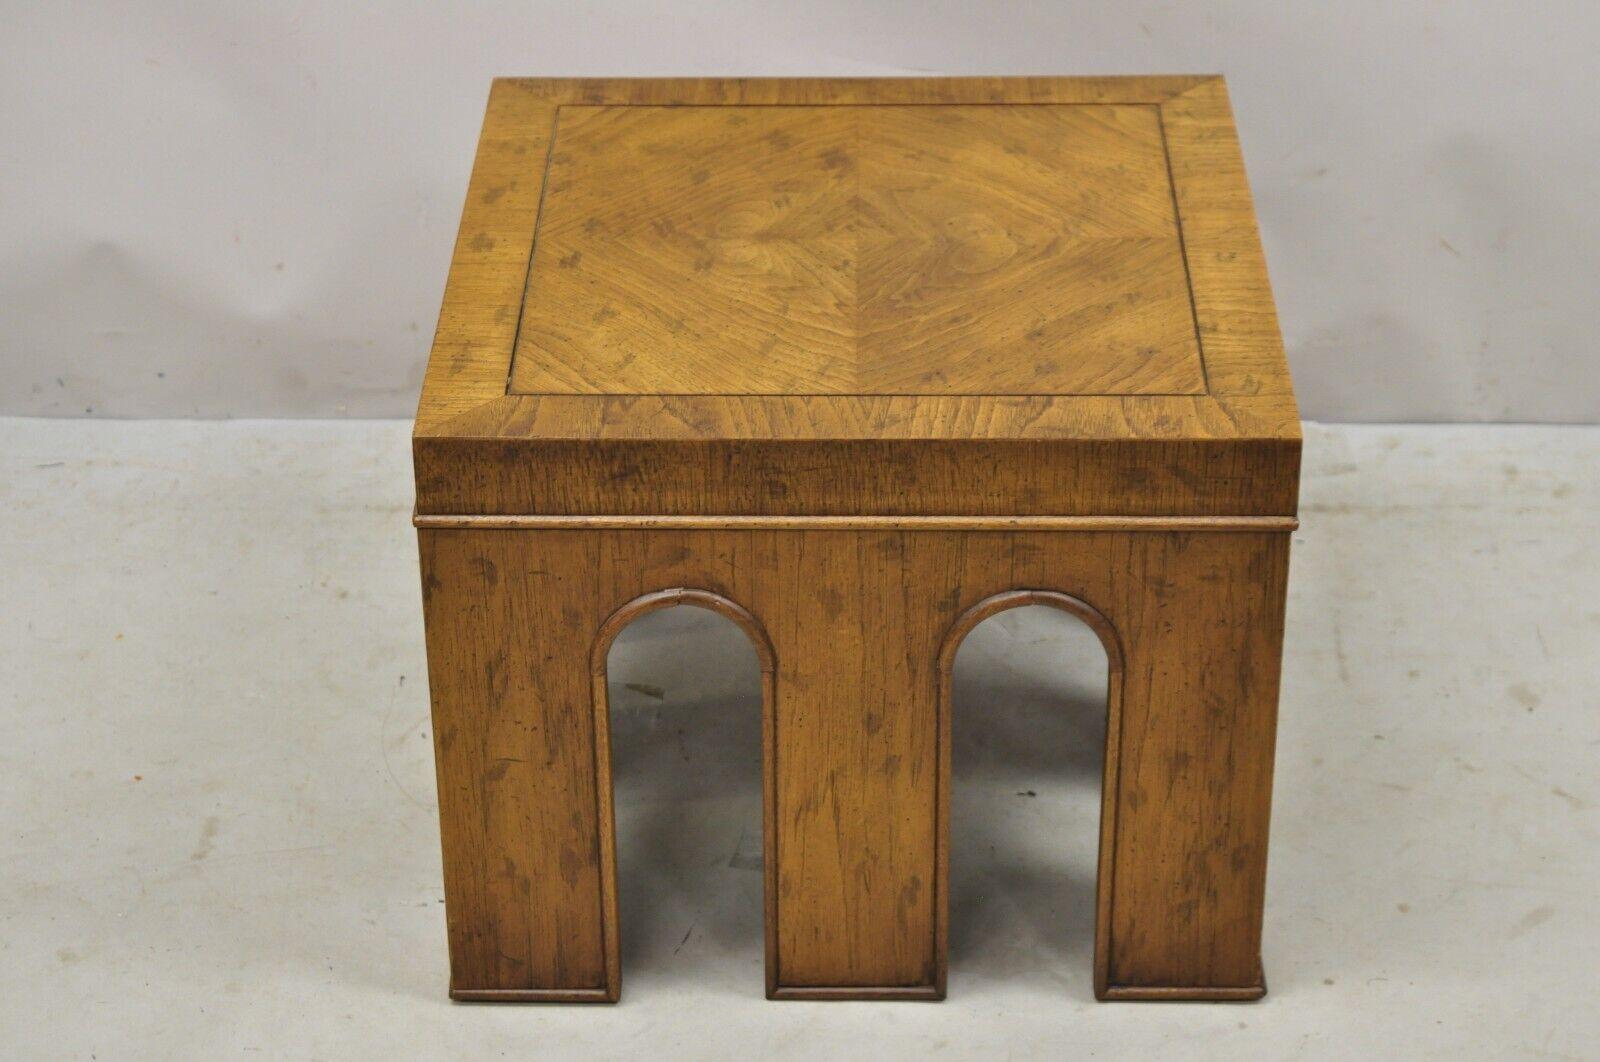 Vintage Drexel Wellington Arched Sides Hollywood Regency Side Table In Good Condition For Sale In Philadelphia, PA